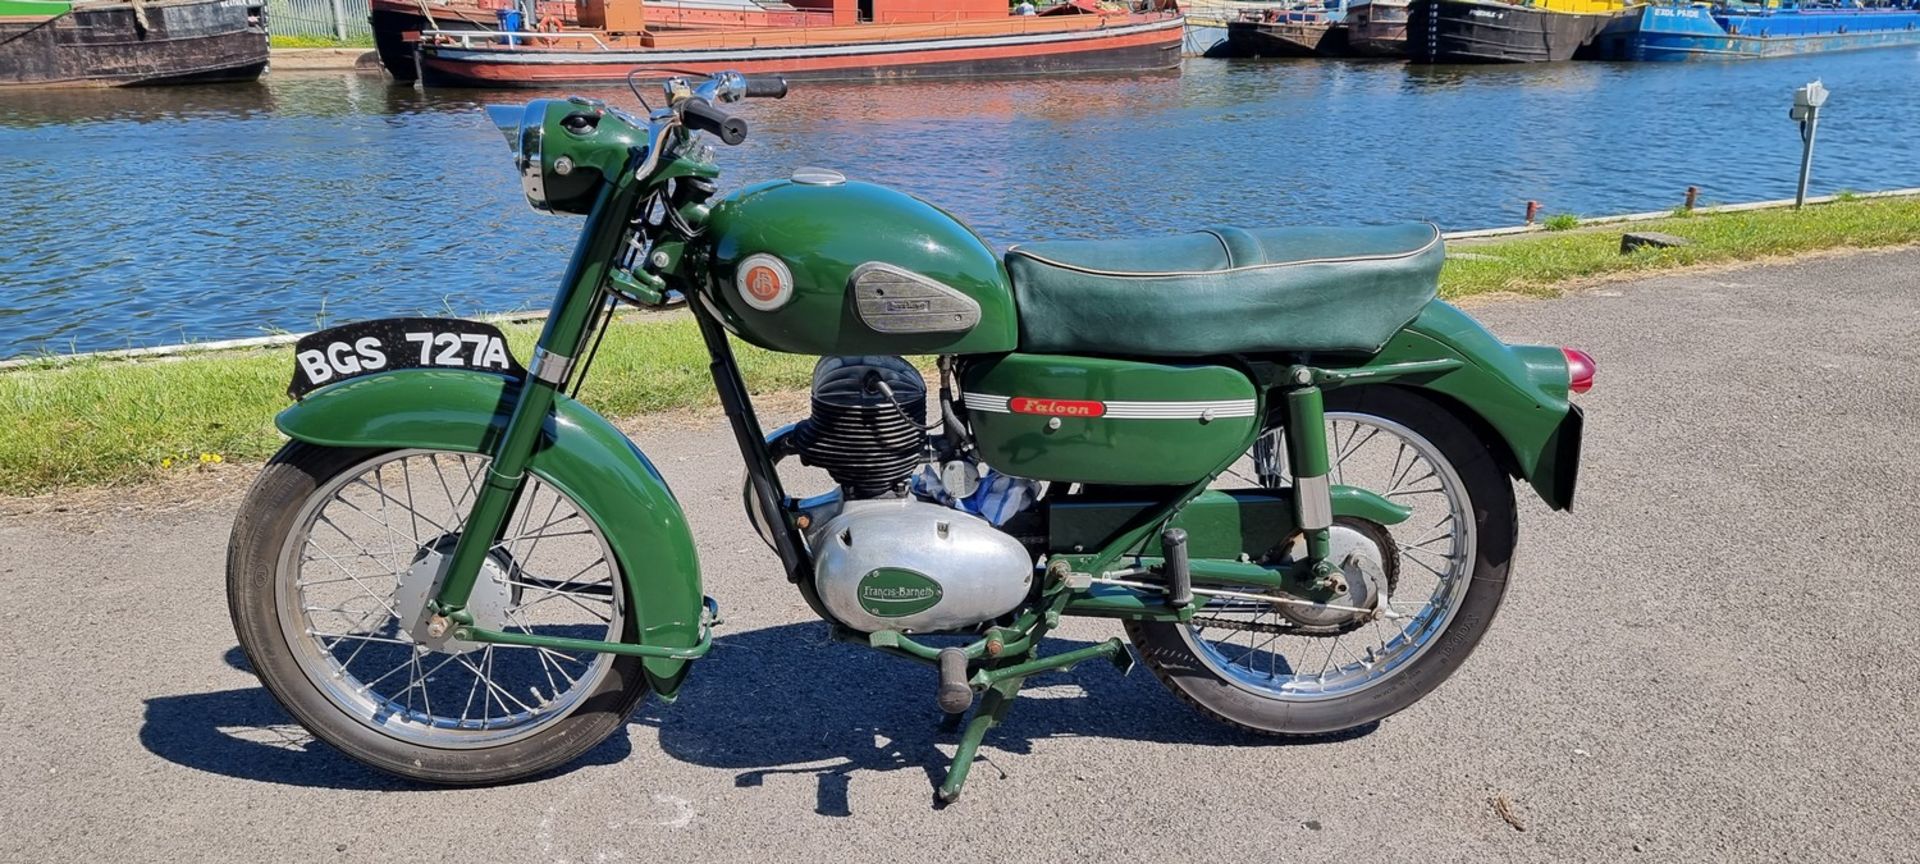 1960 Francis Barnett Falcon 87, 199cc. Registration number BGS 727A. Frame number BF 89027. Engine - Image 2 of 15